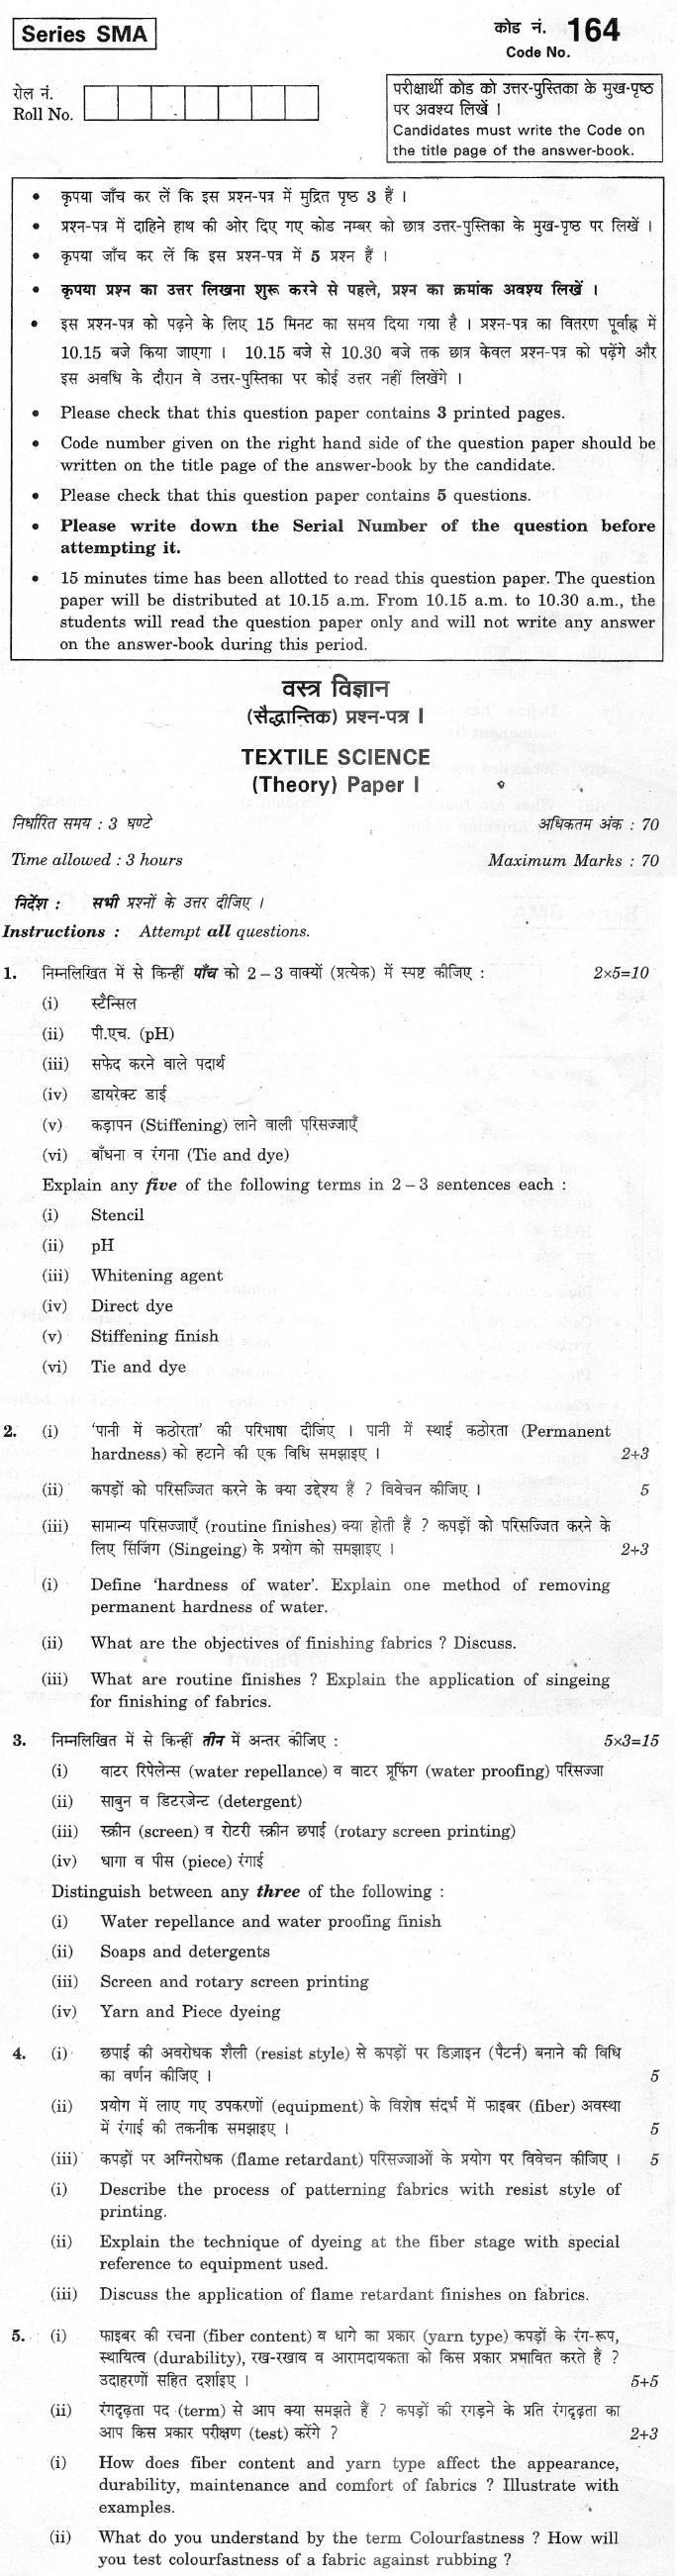 CBSE Class XII Previous Year Question Paper 2012 Textile Science Paper I